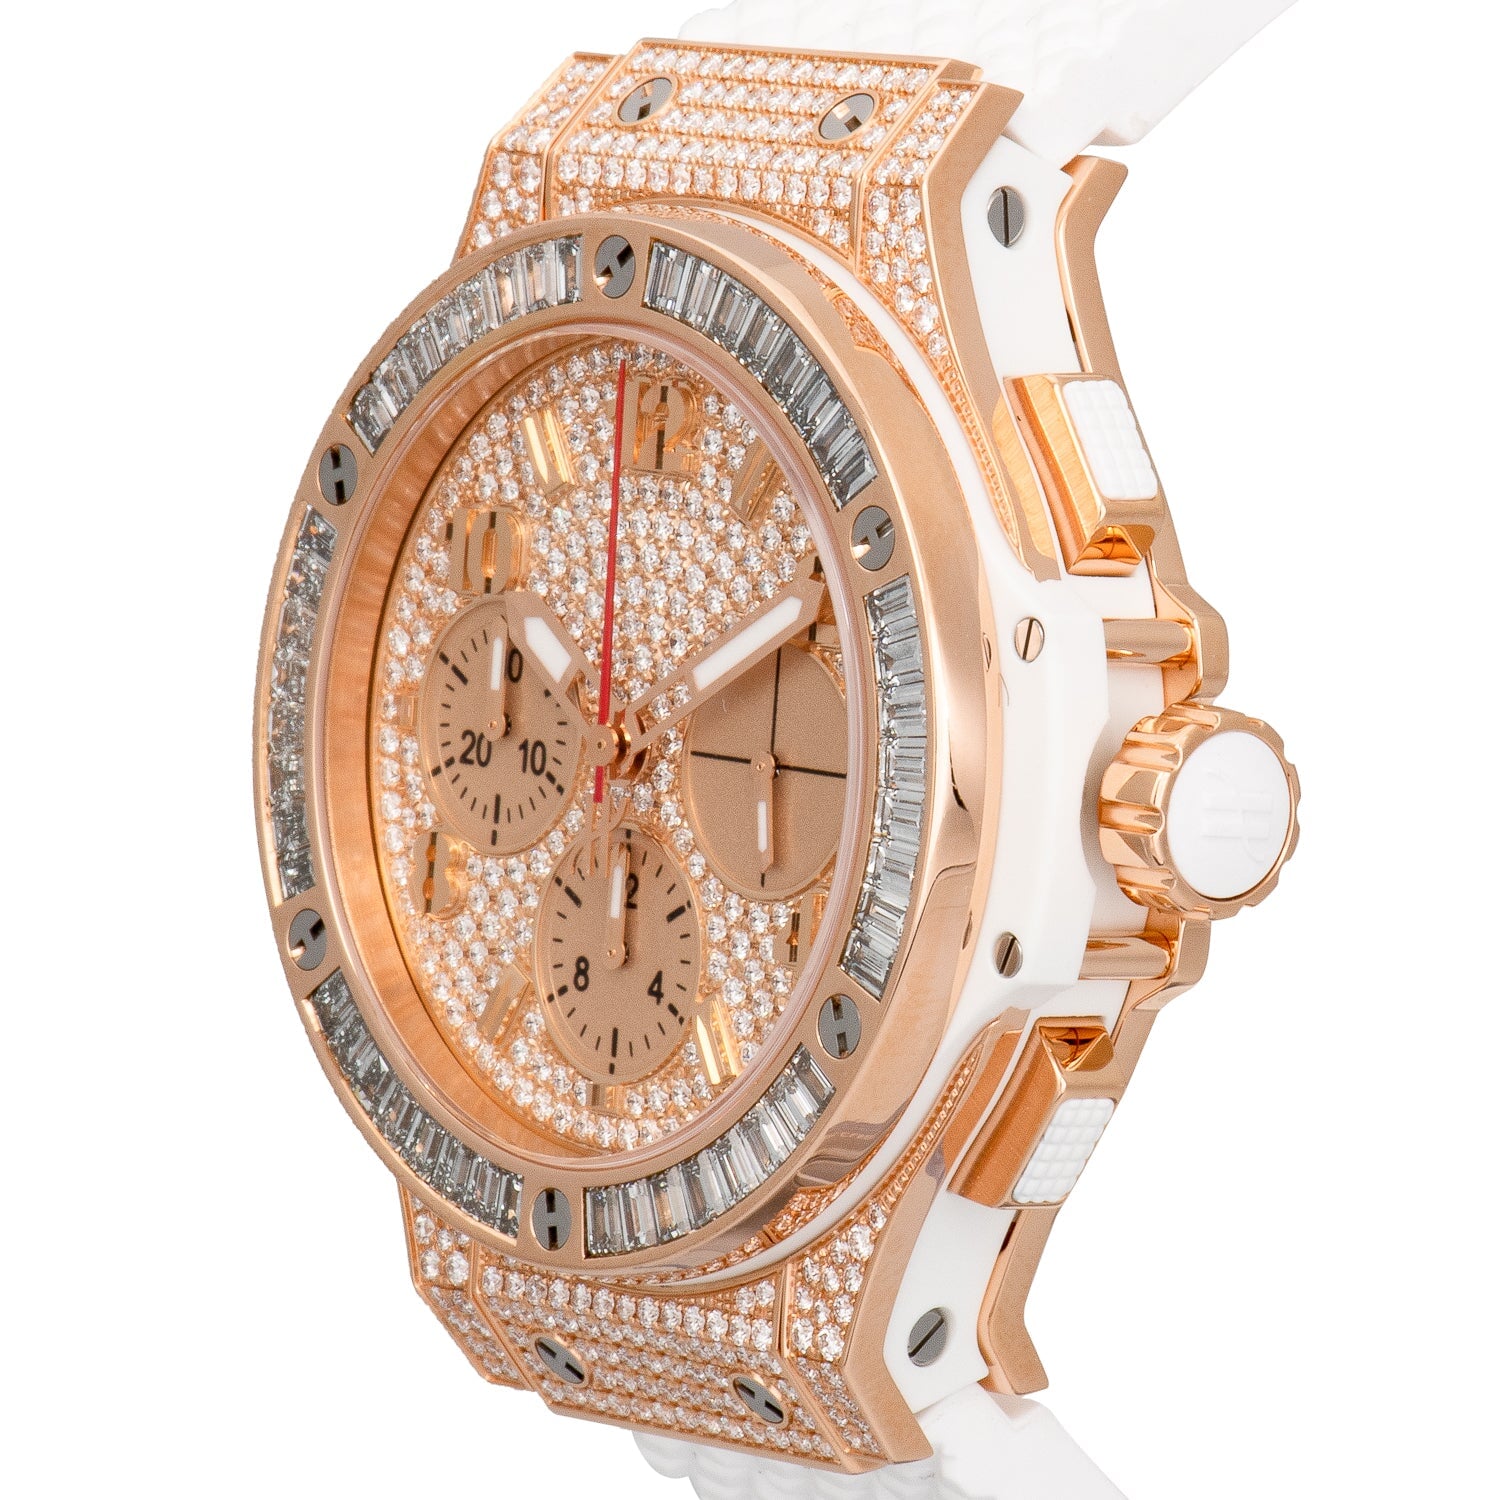 44mm Hublot Mens Diamond Watch Fully Iced Out Big Bang in Rose Gold 18